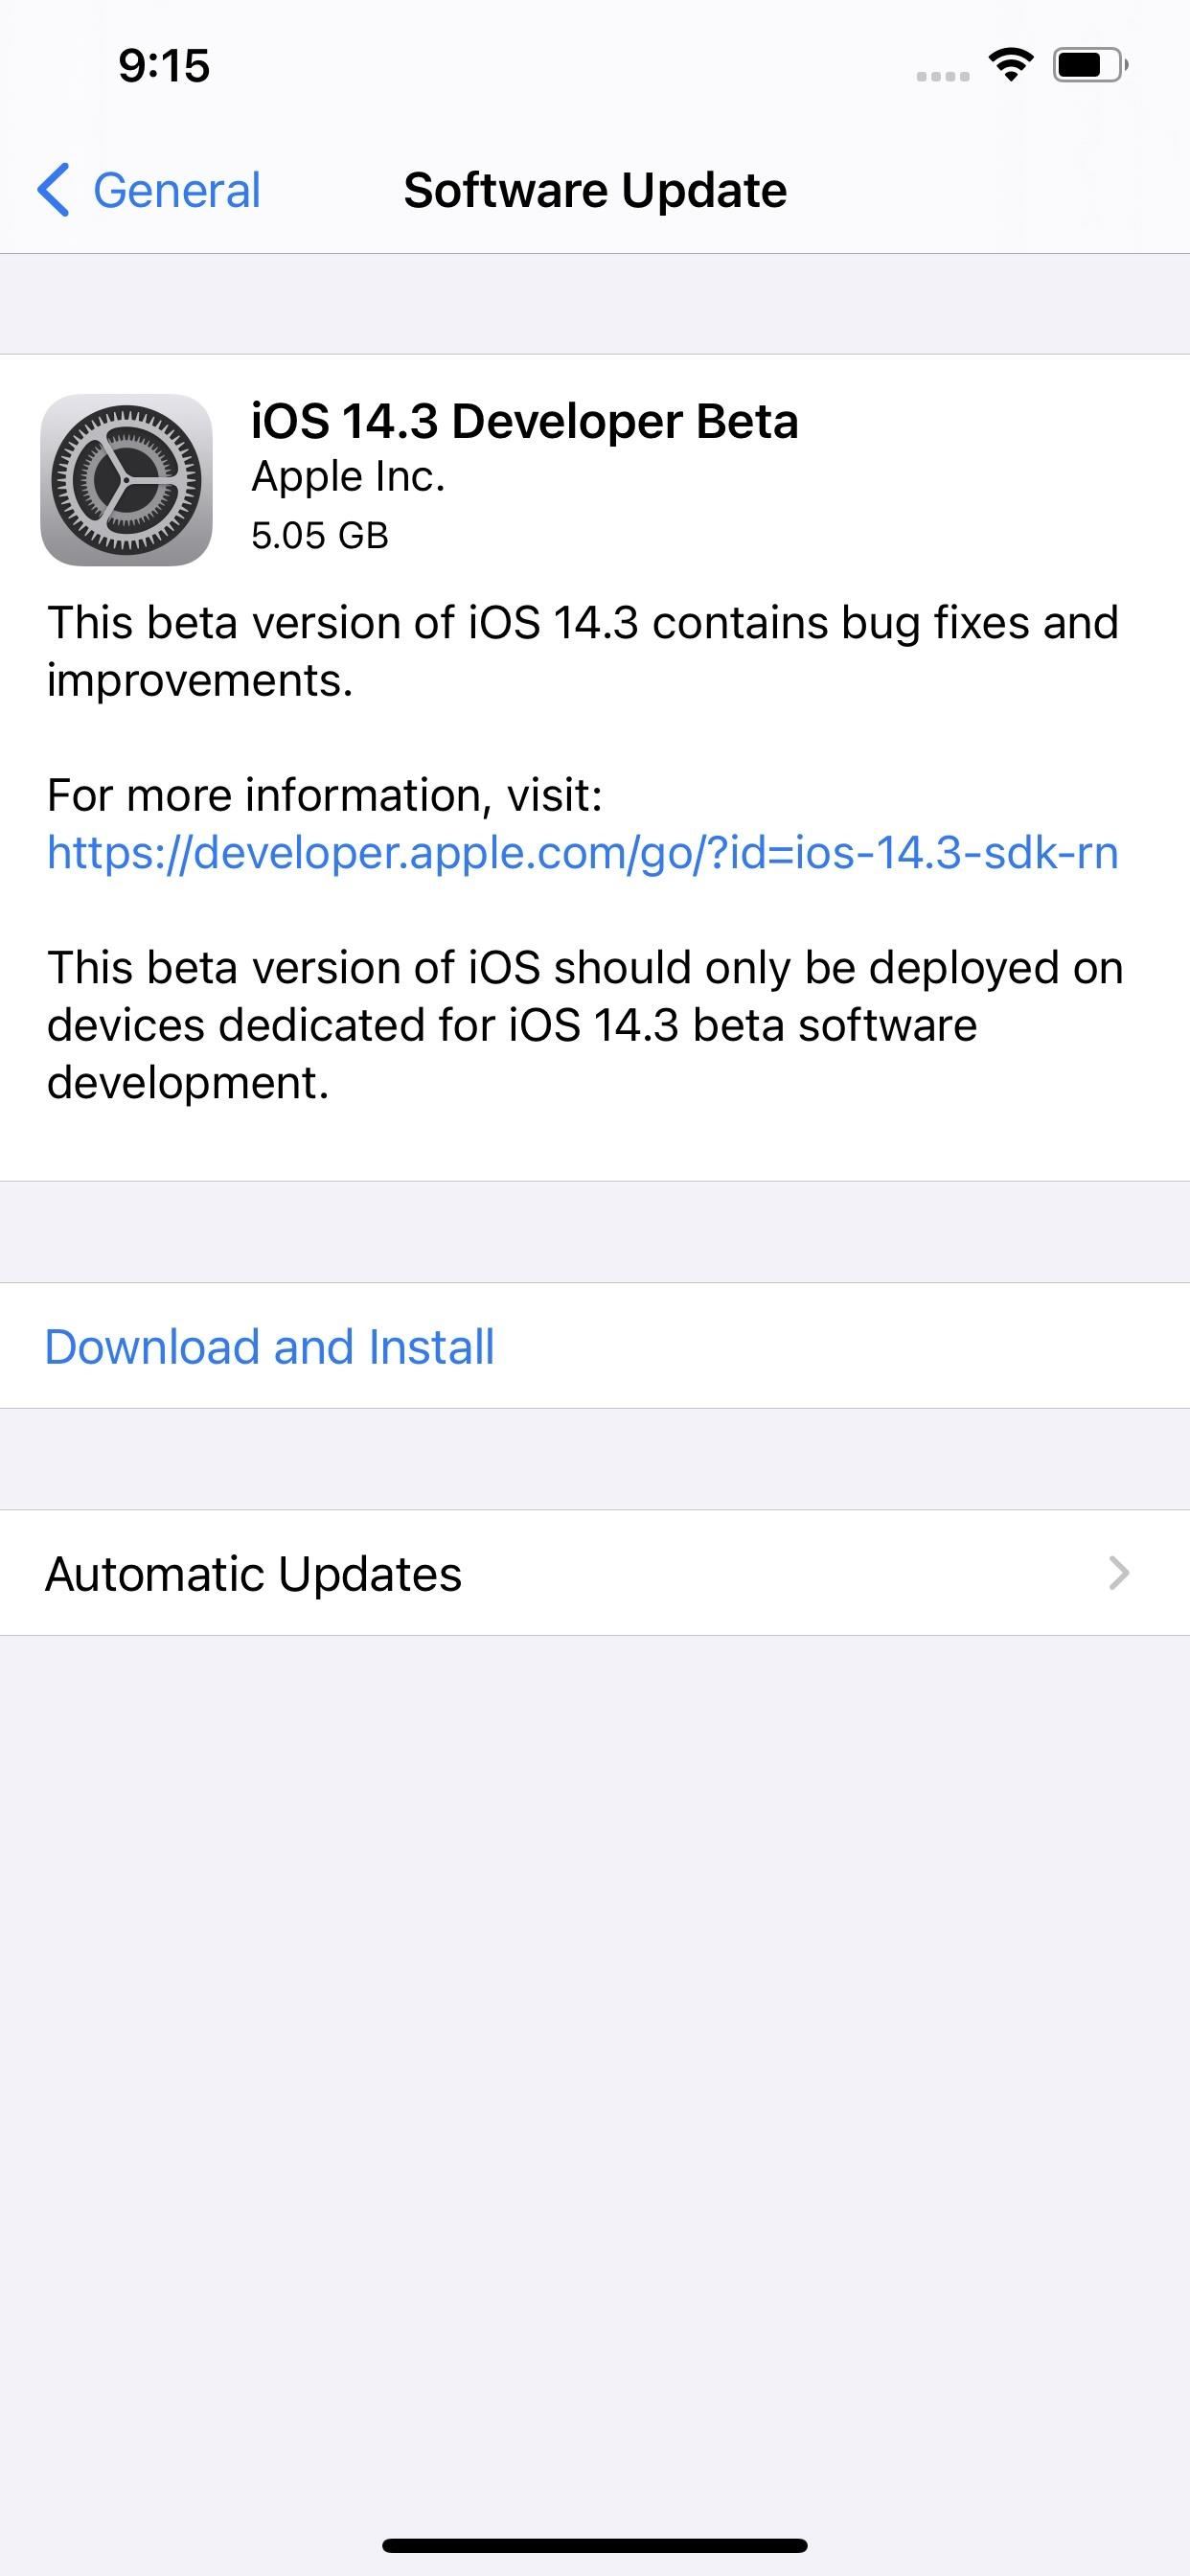 Update: Apple Released iOS 14.3 Beta 1 for Developers for Real, Includes ProRAW Support & Air-Quality Changes in Weather